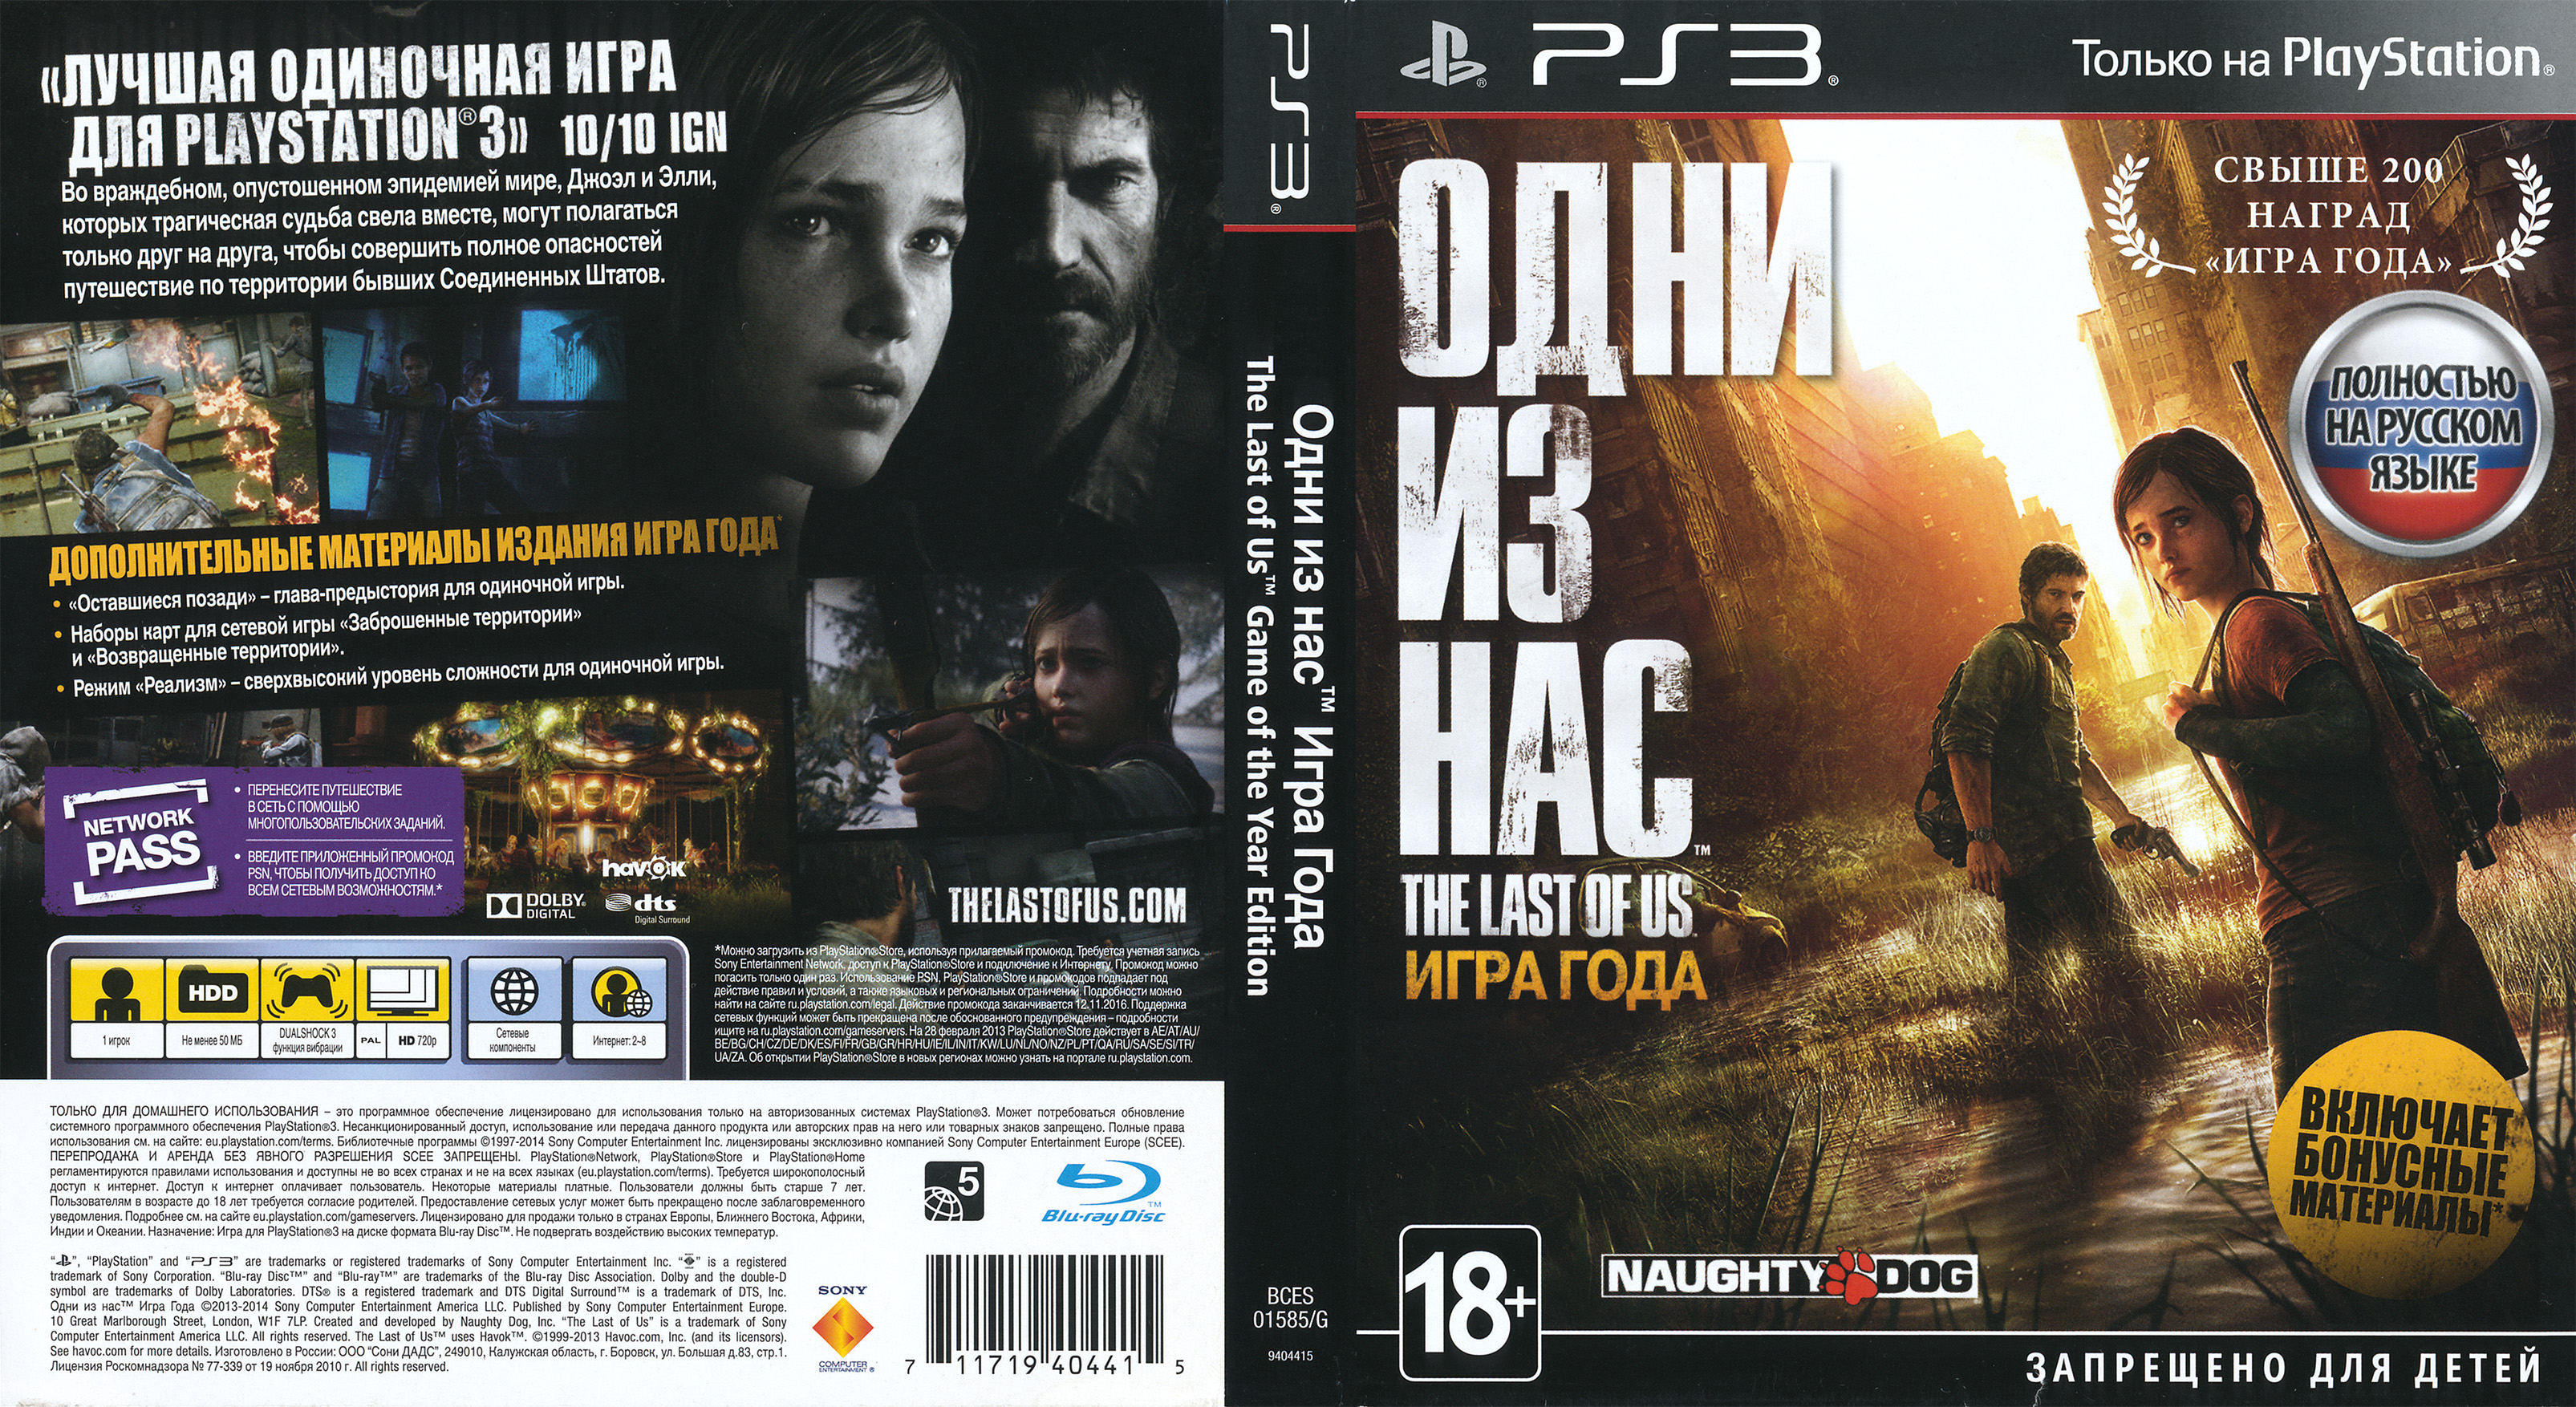 000_The_Last_of_Us_GOTY_PS3_BCES-01585GRSC_Russia_inlay_front_preview.jpg.